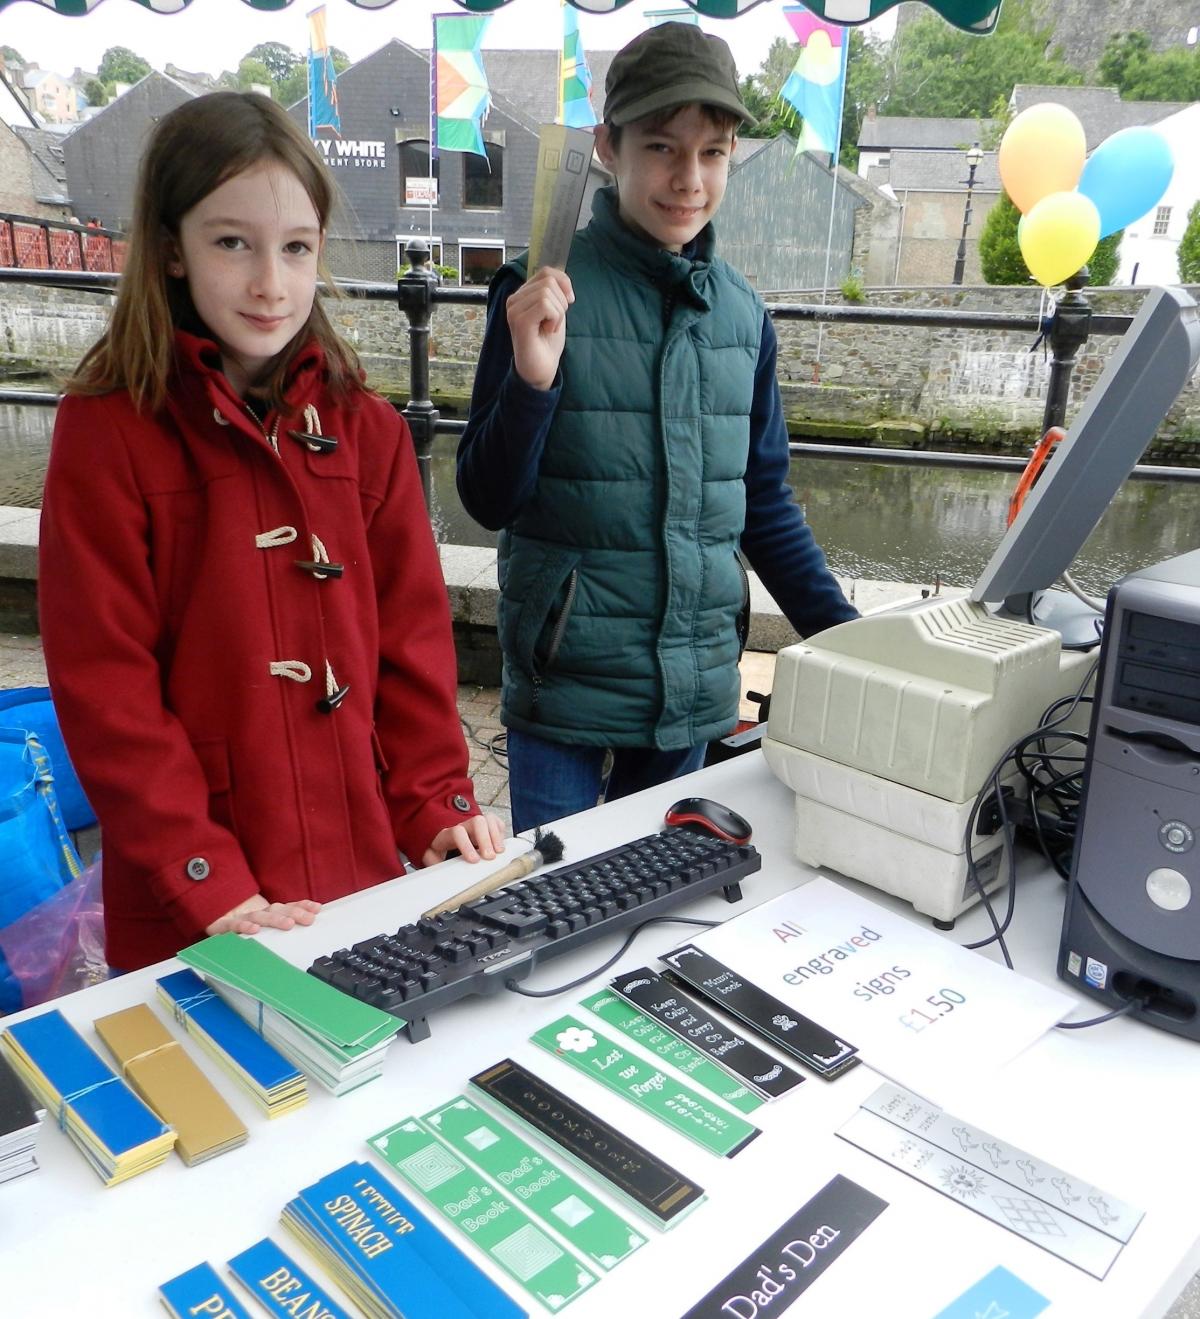 The home-schooled Pamment-Jones family had their own stall with P-Jay's engraved gifts. 13-year-old Lewis, pictured with Zara, used an engraving machine on site to produce signs, plant markers and bookmarks with messages 